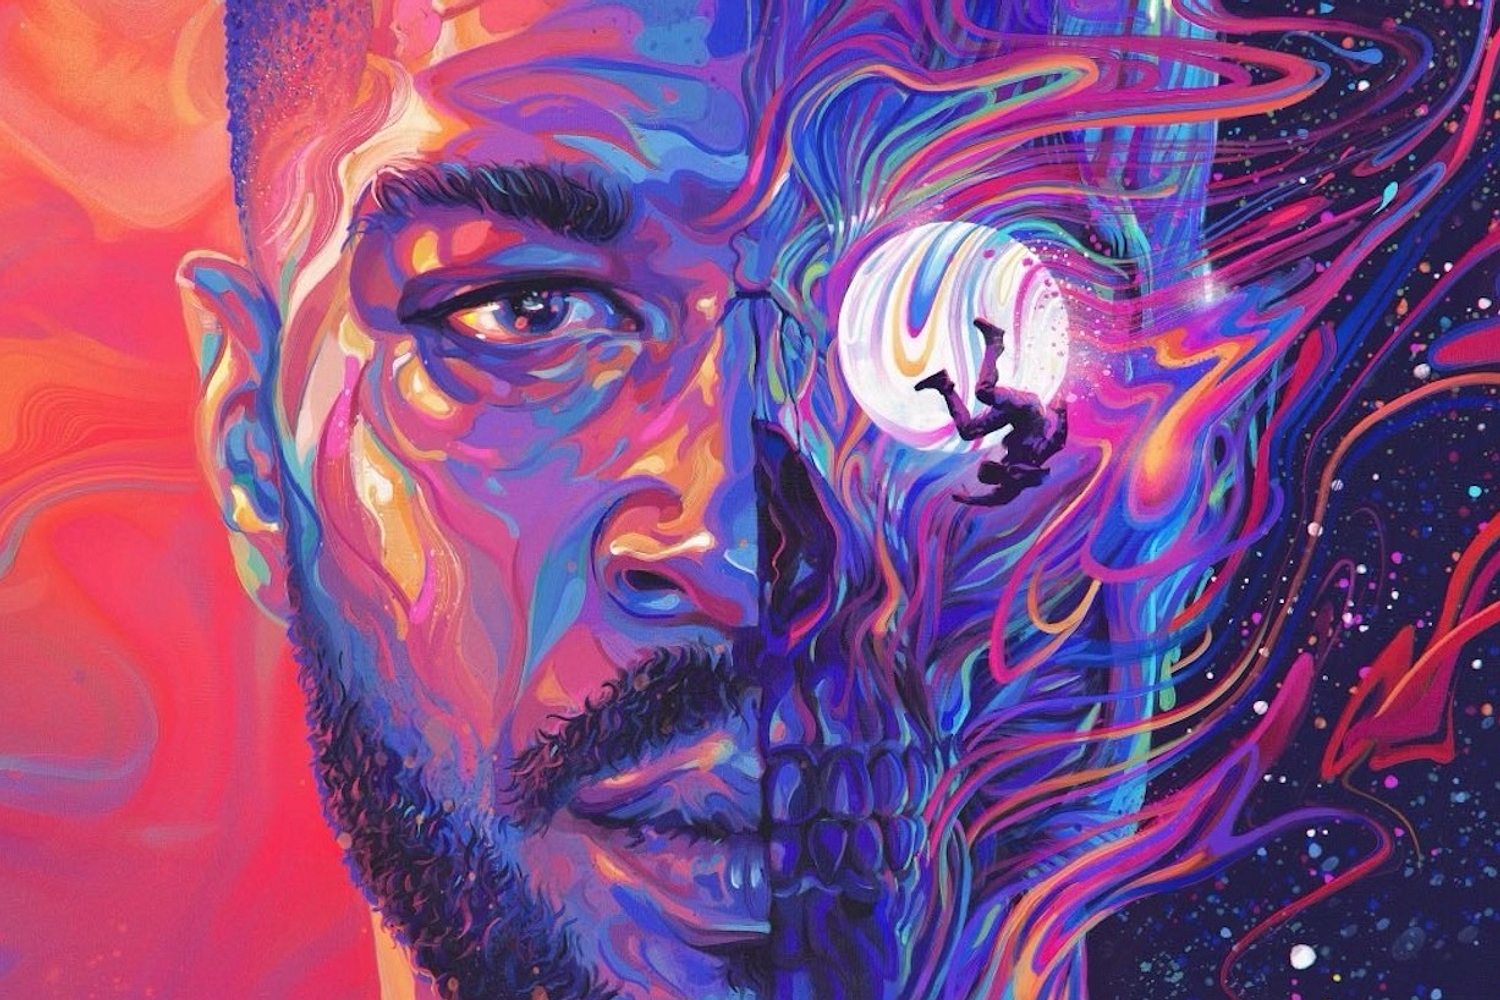 Kid Cudi to release ‘Man On The Moon III: The Chosen’ this week